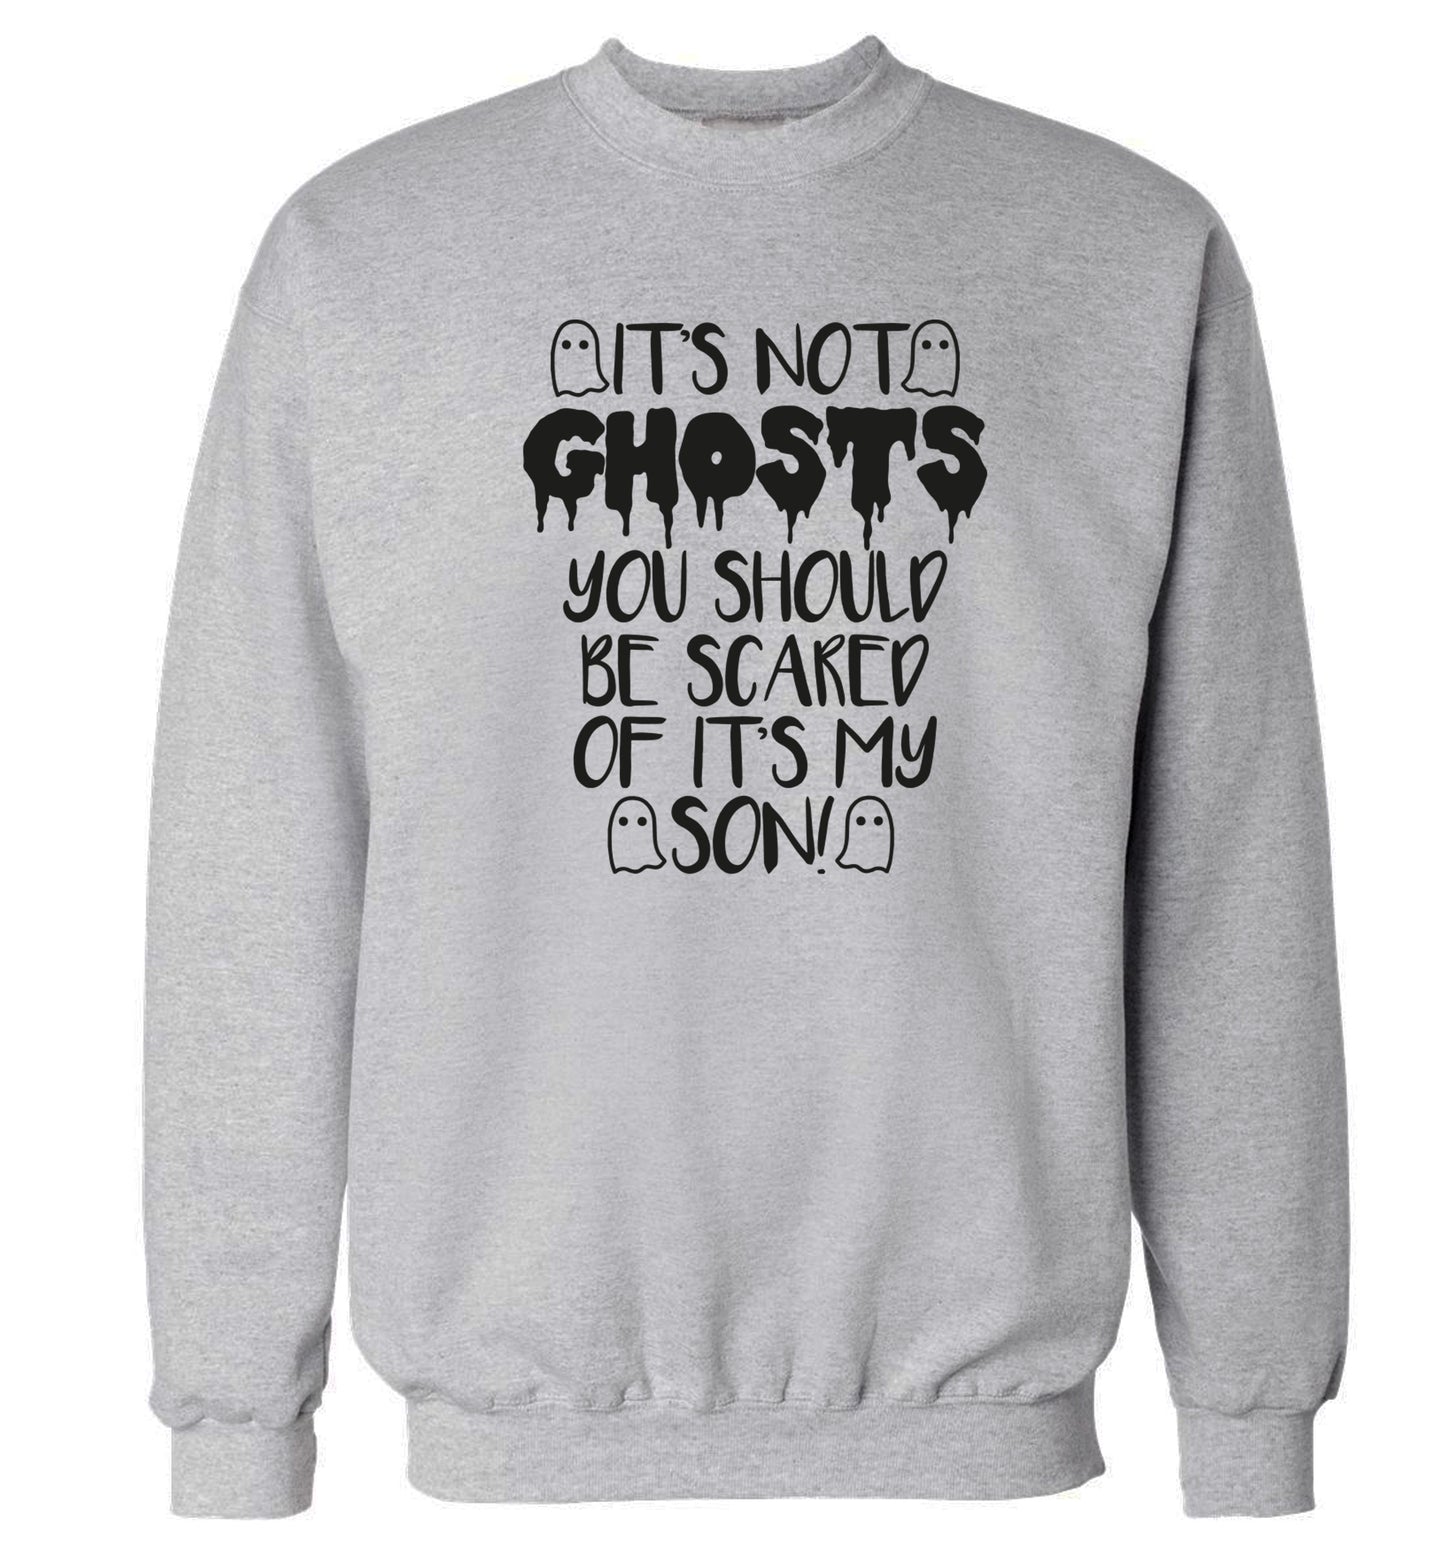 It's not ghosts you should be scared of it's my son! Adult's unisex grey Sweater 2XL